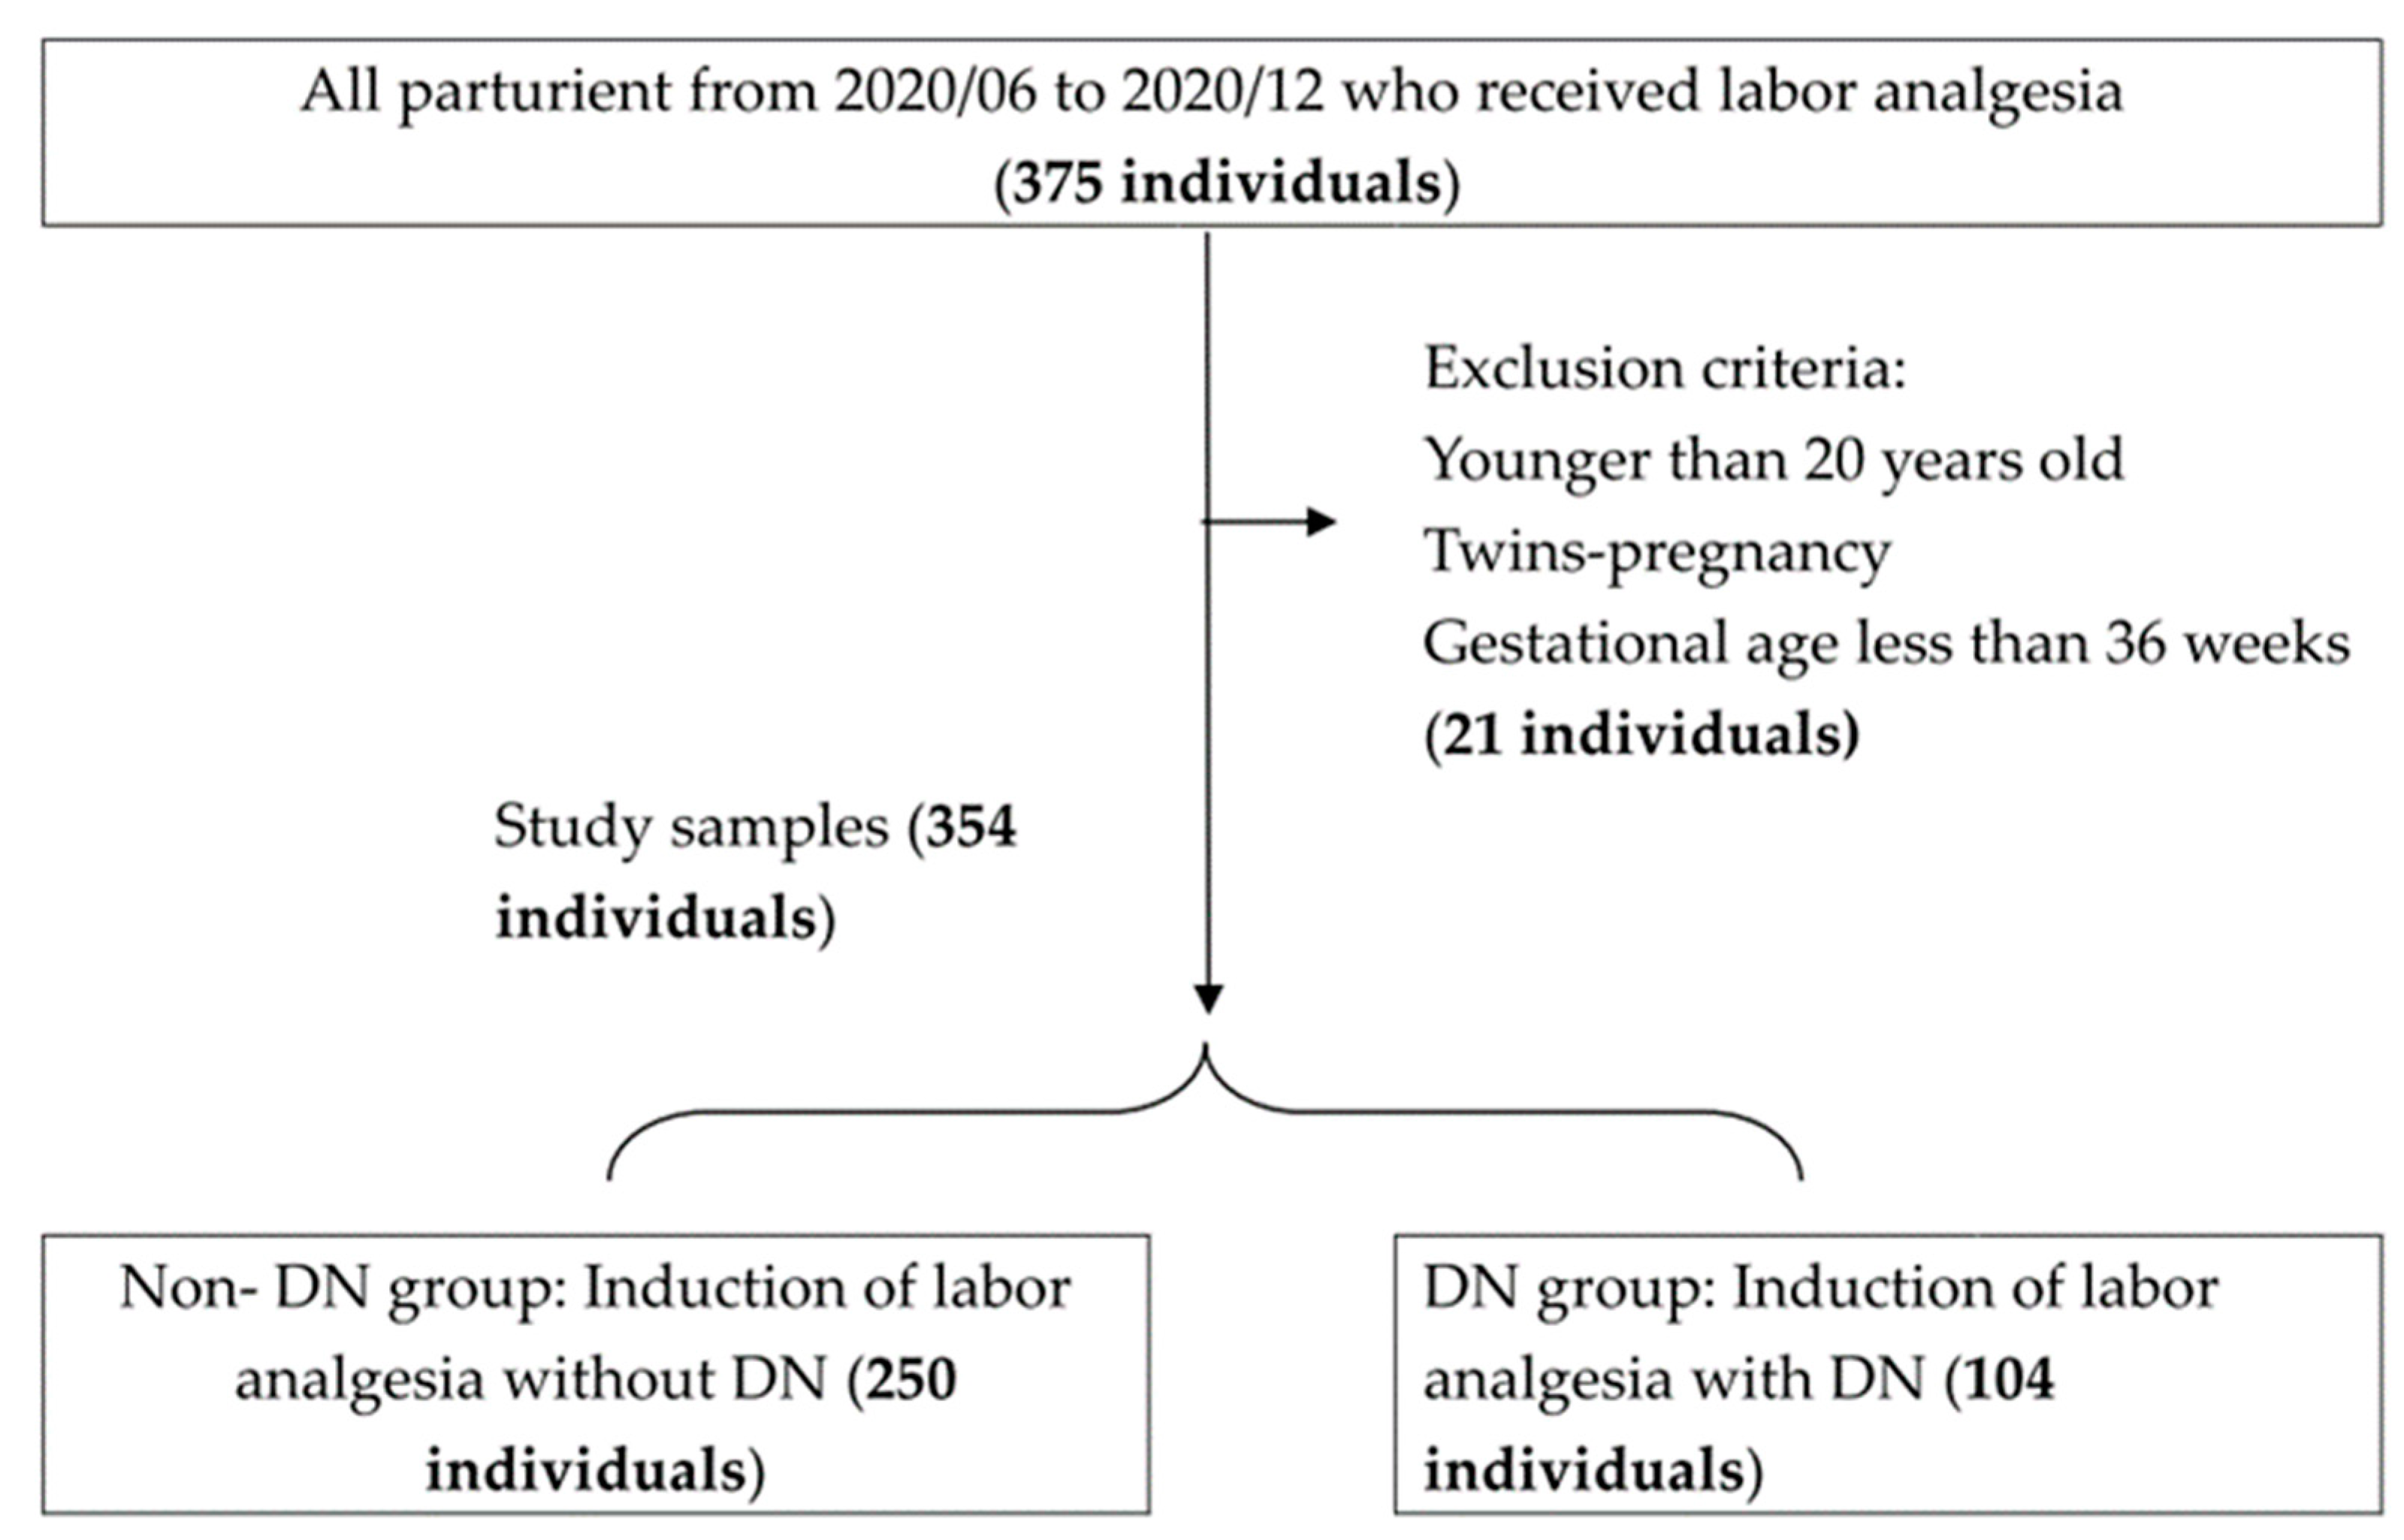 Prolonged second stage of labor in epidural analgesia deliveries tied to  increased risk of postpartum urinary retention - Sarkari Doctor